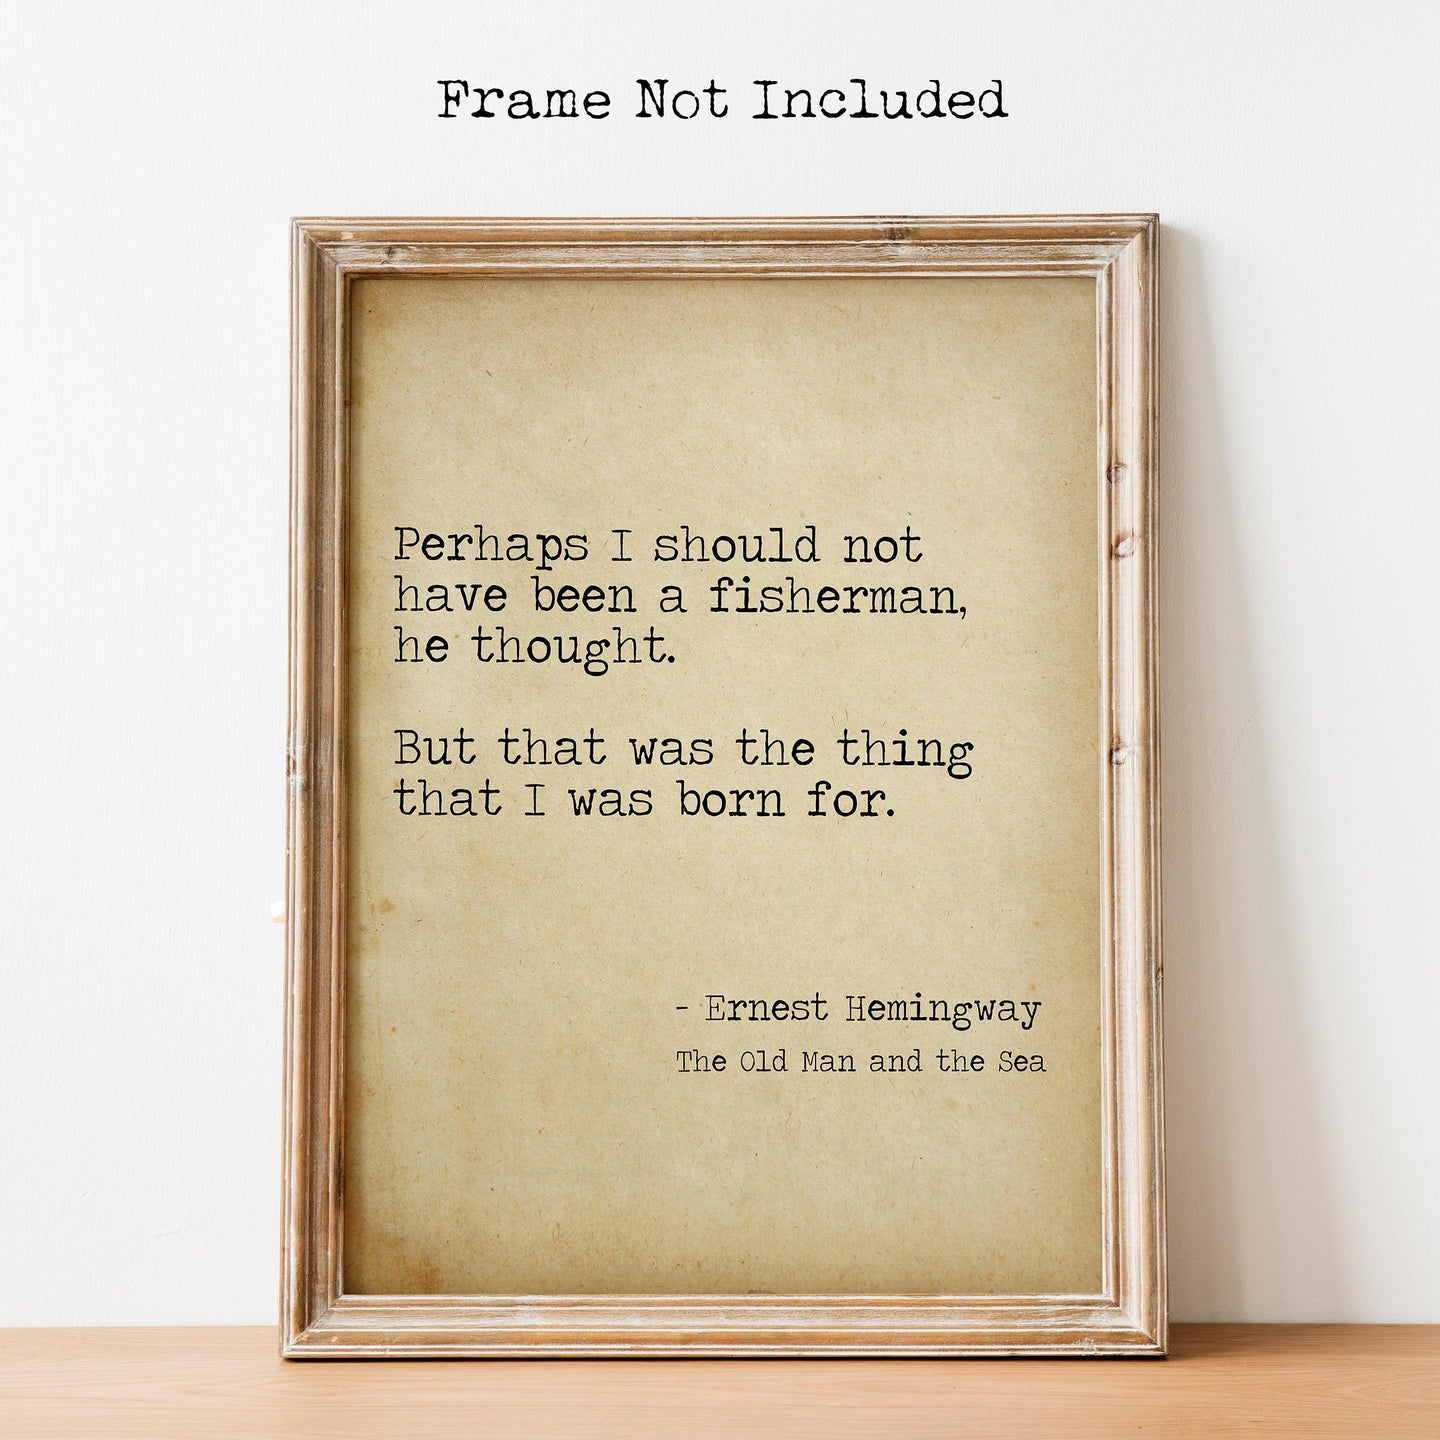 Ernest Hemingway Quote - Fishing quote from The Old Man And The Sea - the thing that I was born for - fishing gifts - fishing decor UNFRAMED